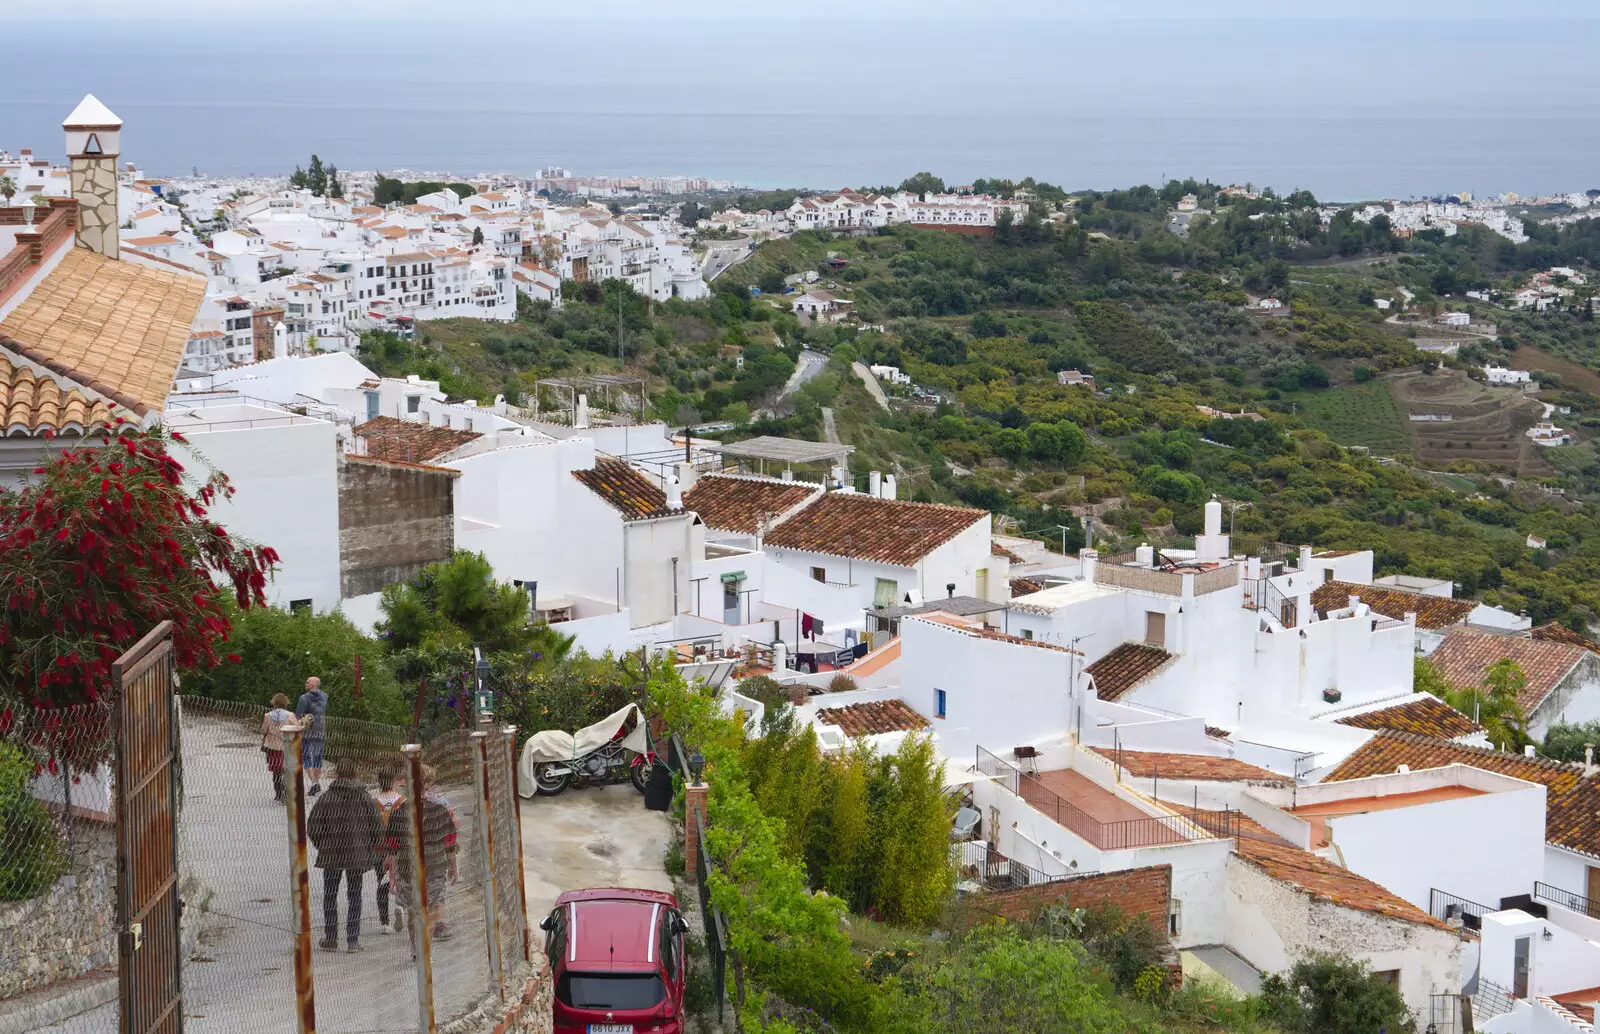 We climb all the way up to the top of the town, from The Caves of Nerja, and Frigiliana, Andalusia, Spain - 18th April 2019